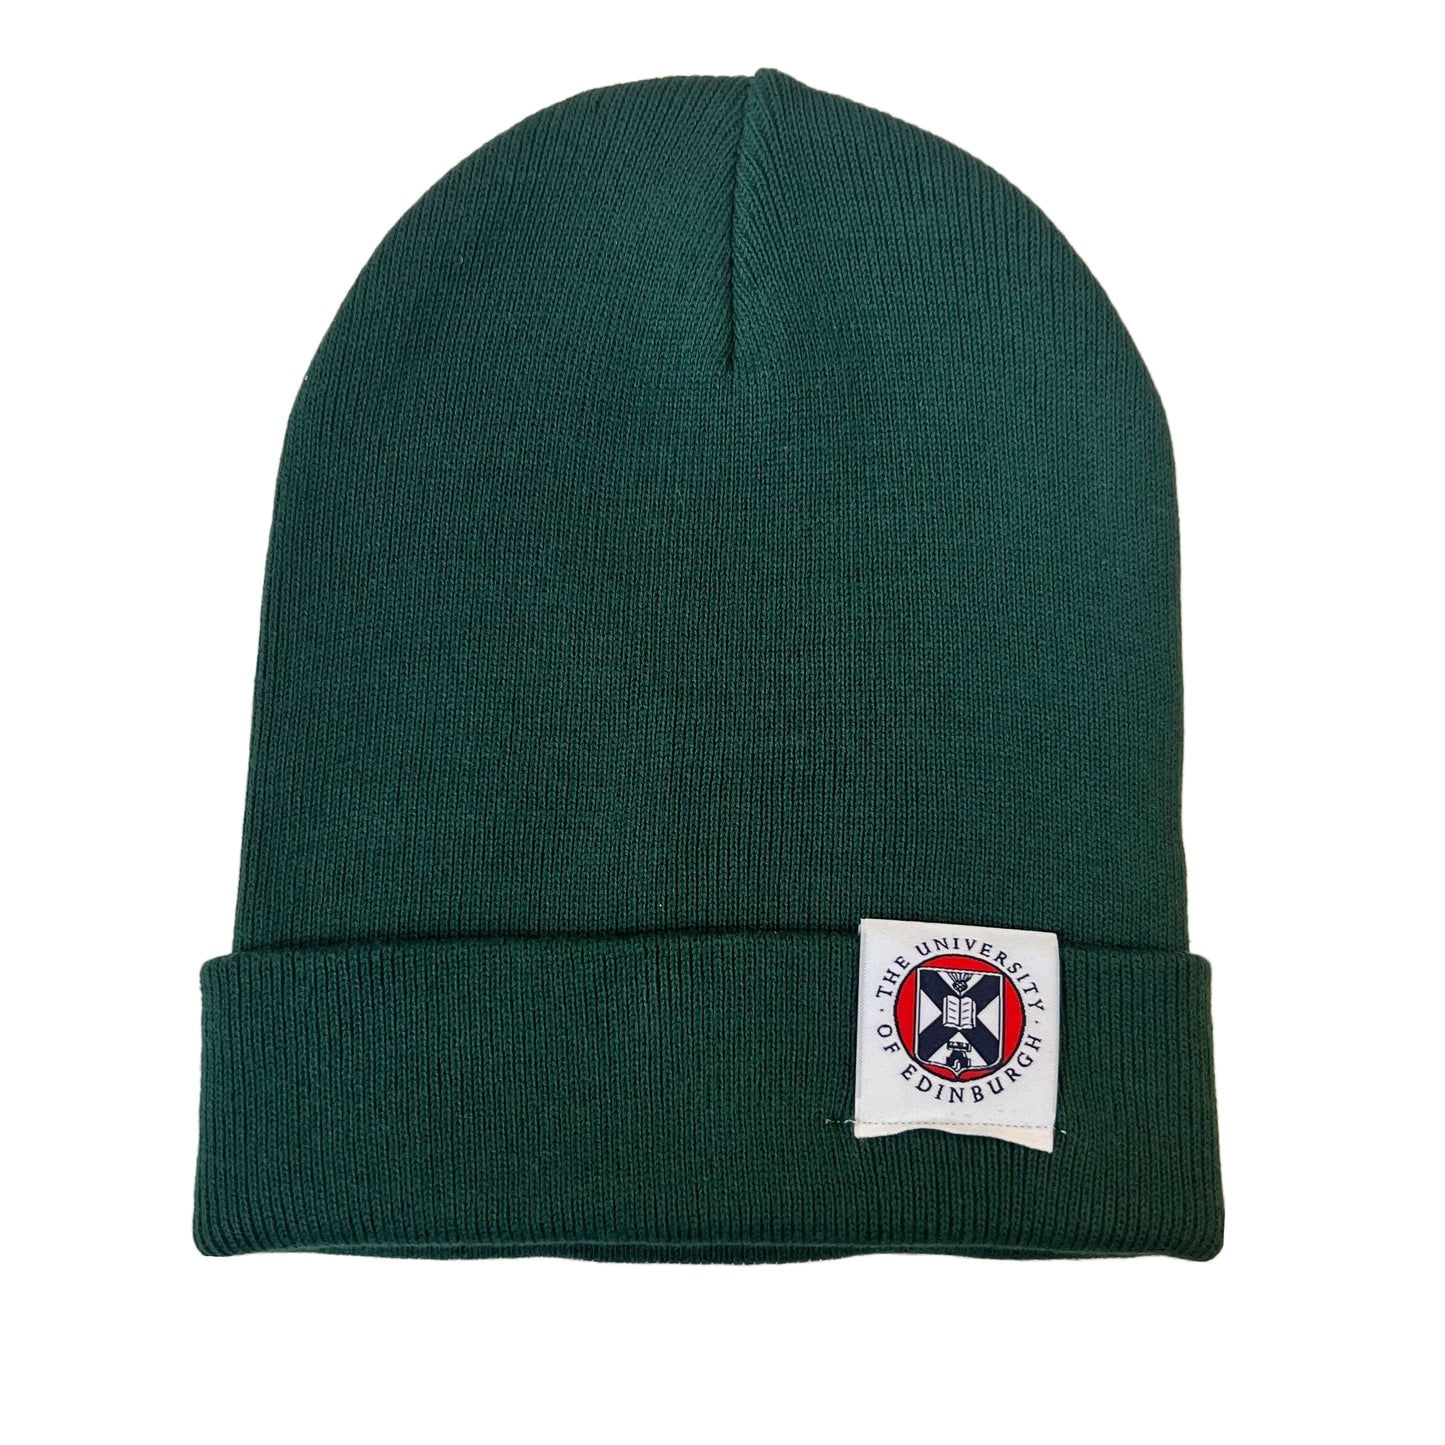 bottle green rubbed beanie with woven label featuring University crest in red white and navy